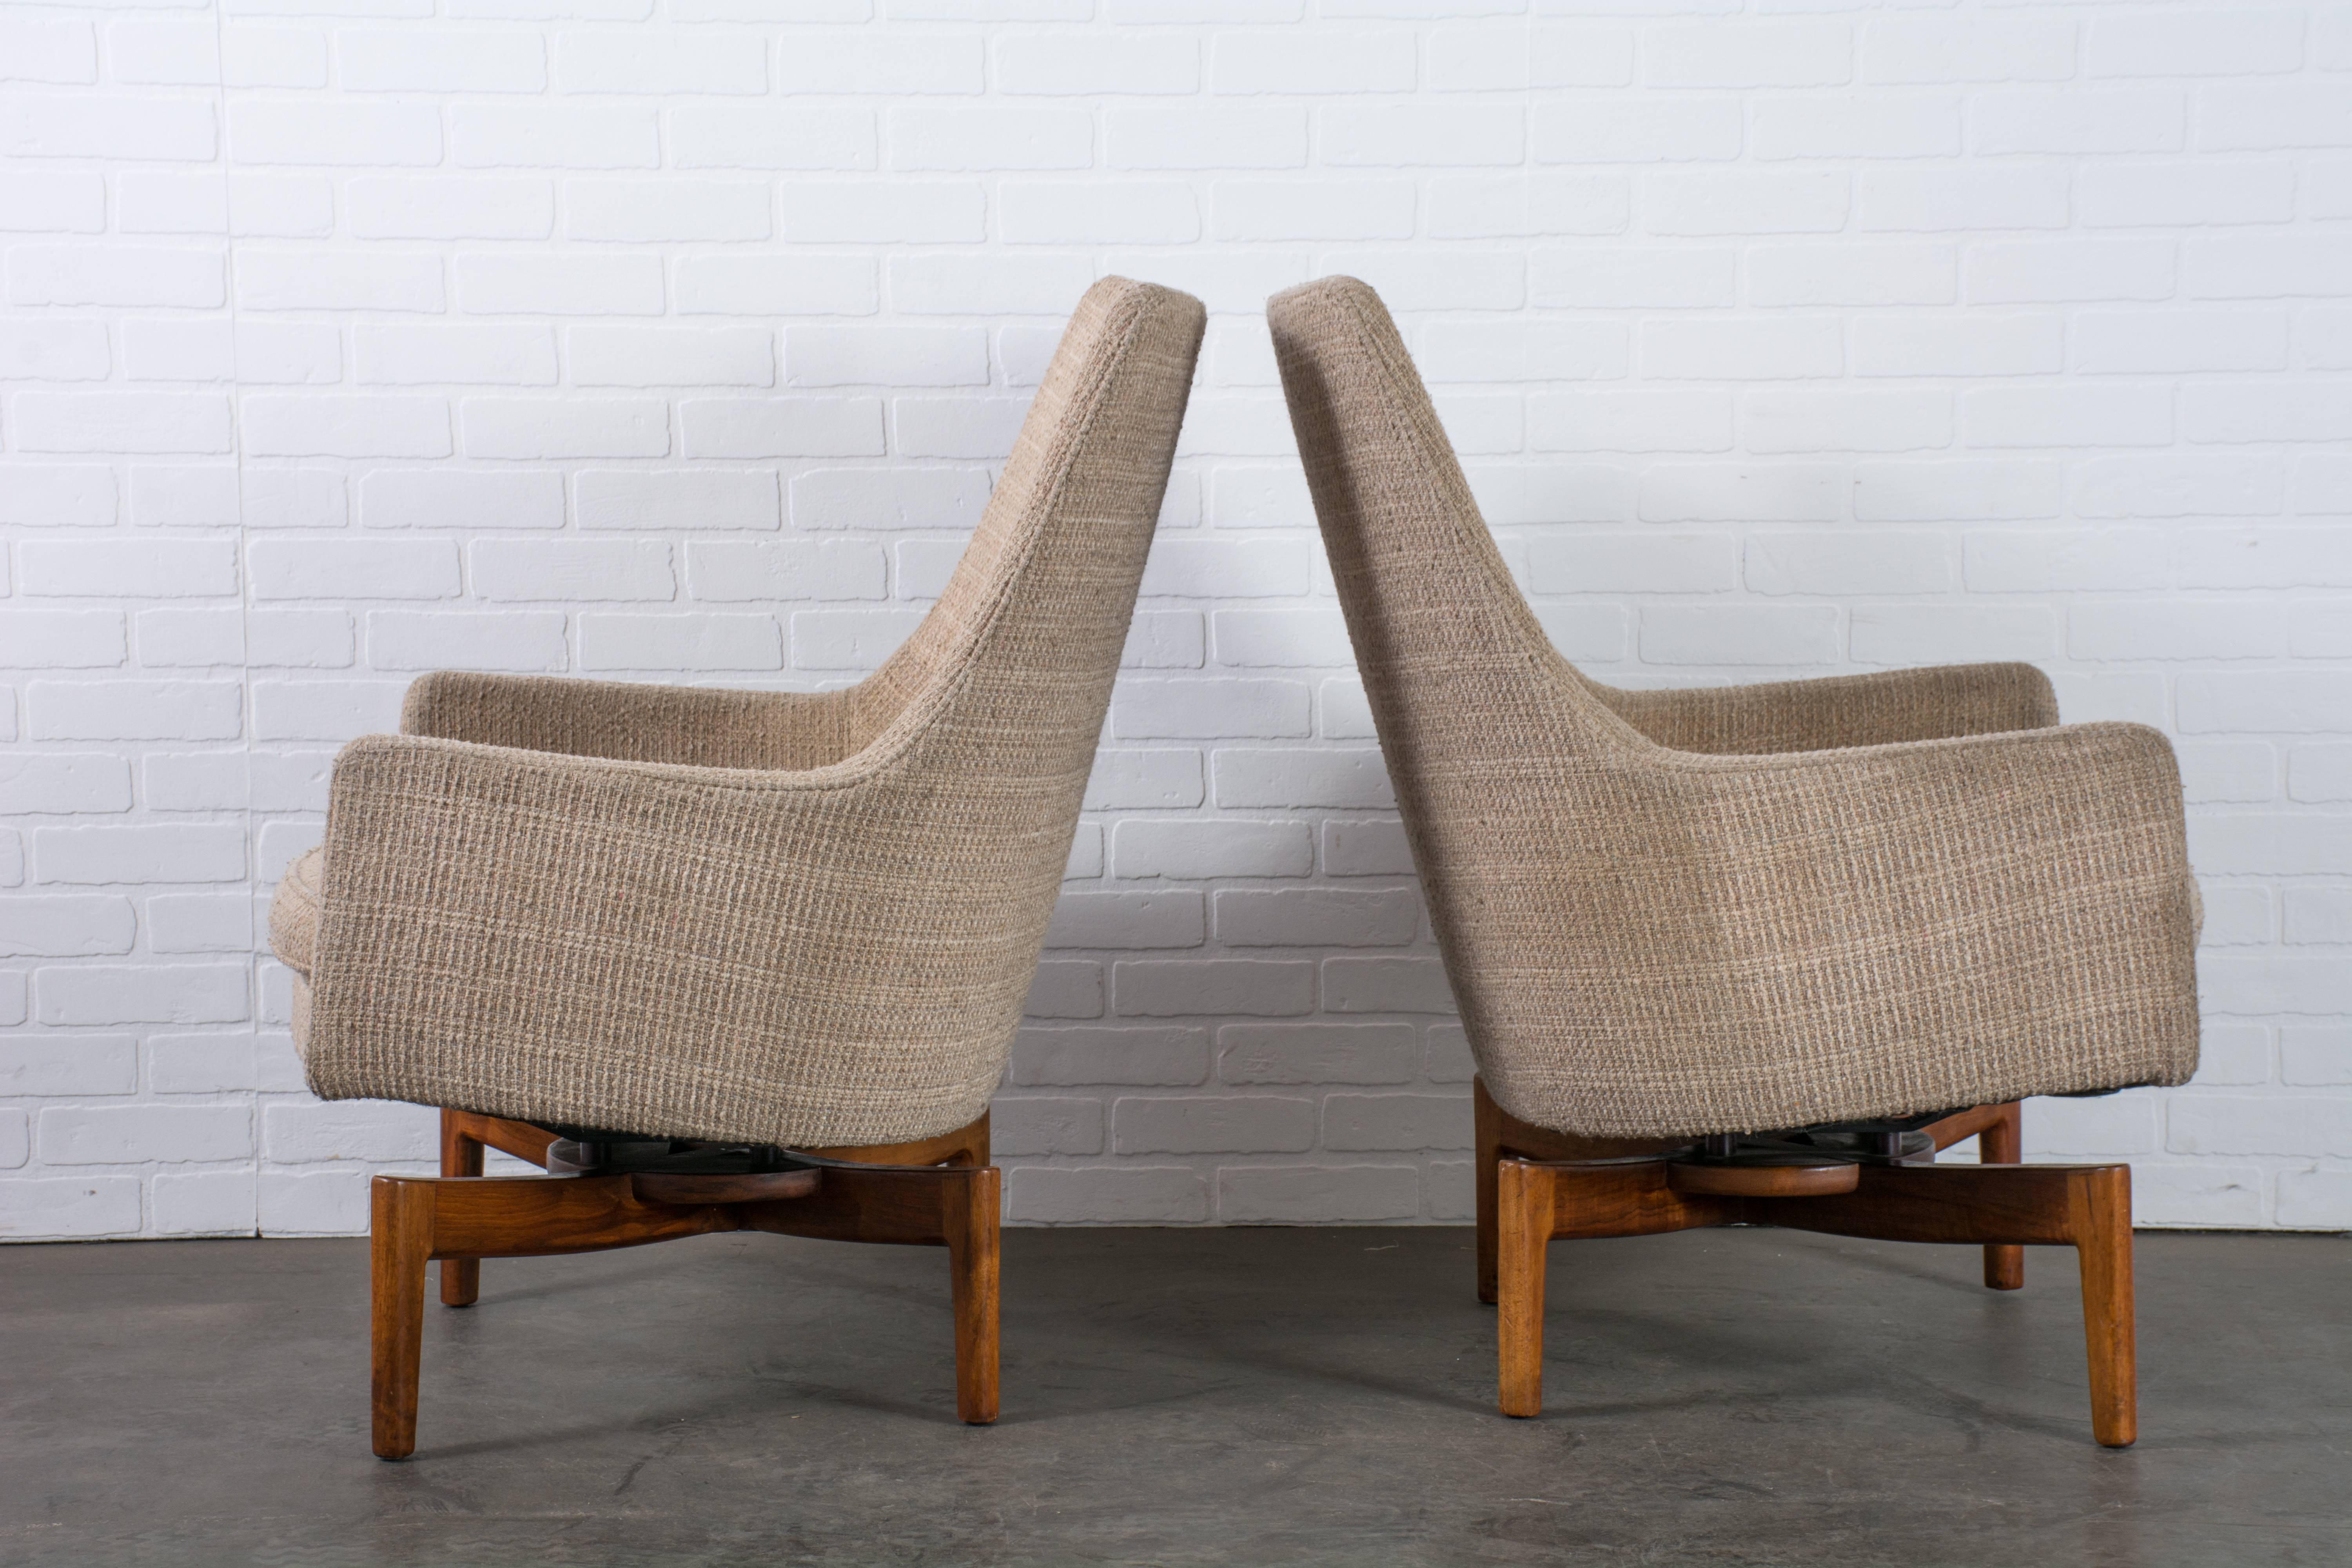 American Pair of Jens Risom Lounge Chairs